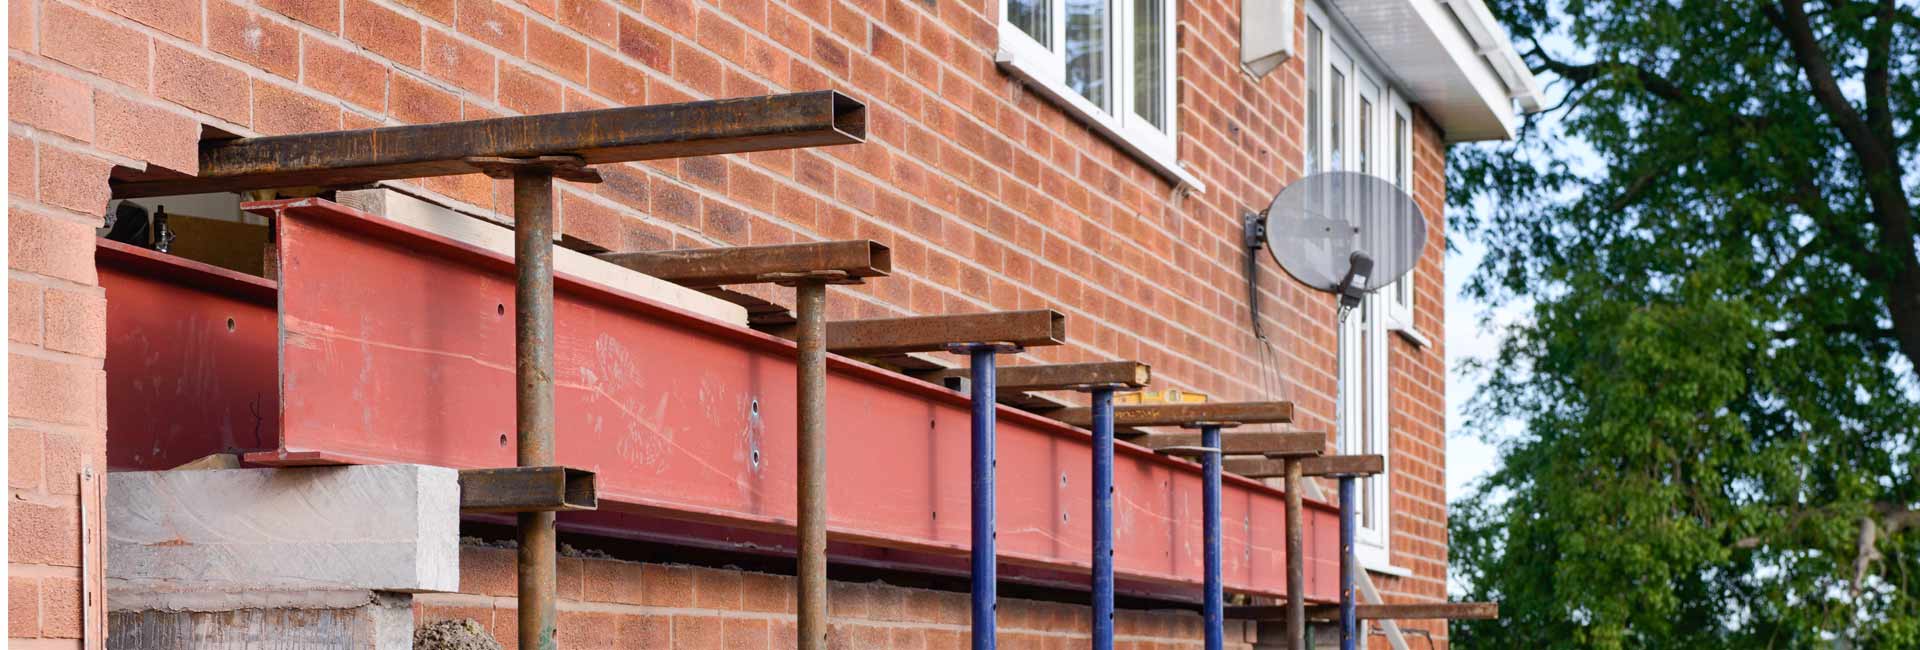 Structural Wall Removal Melbourne | Expert Wall Removal